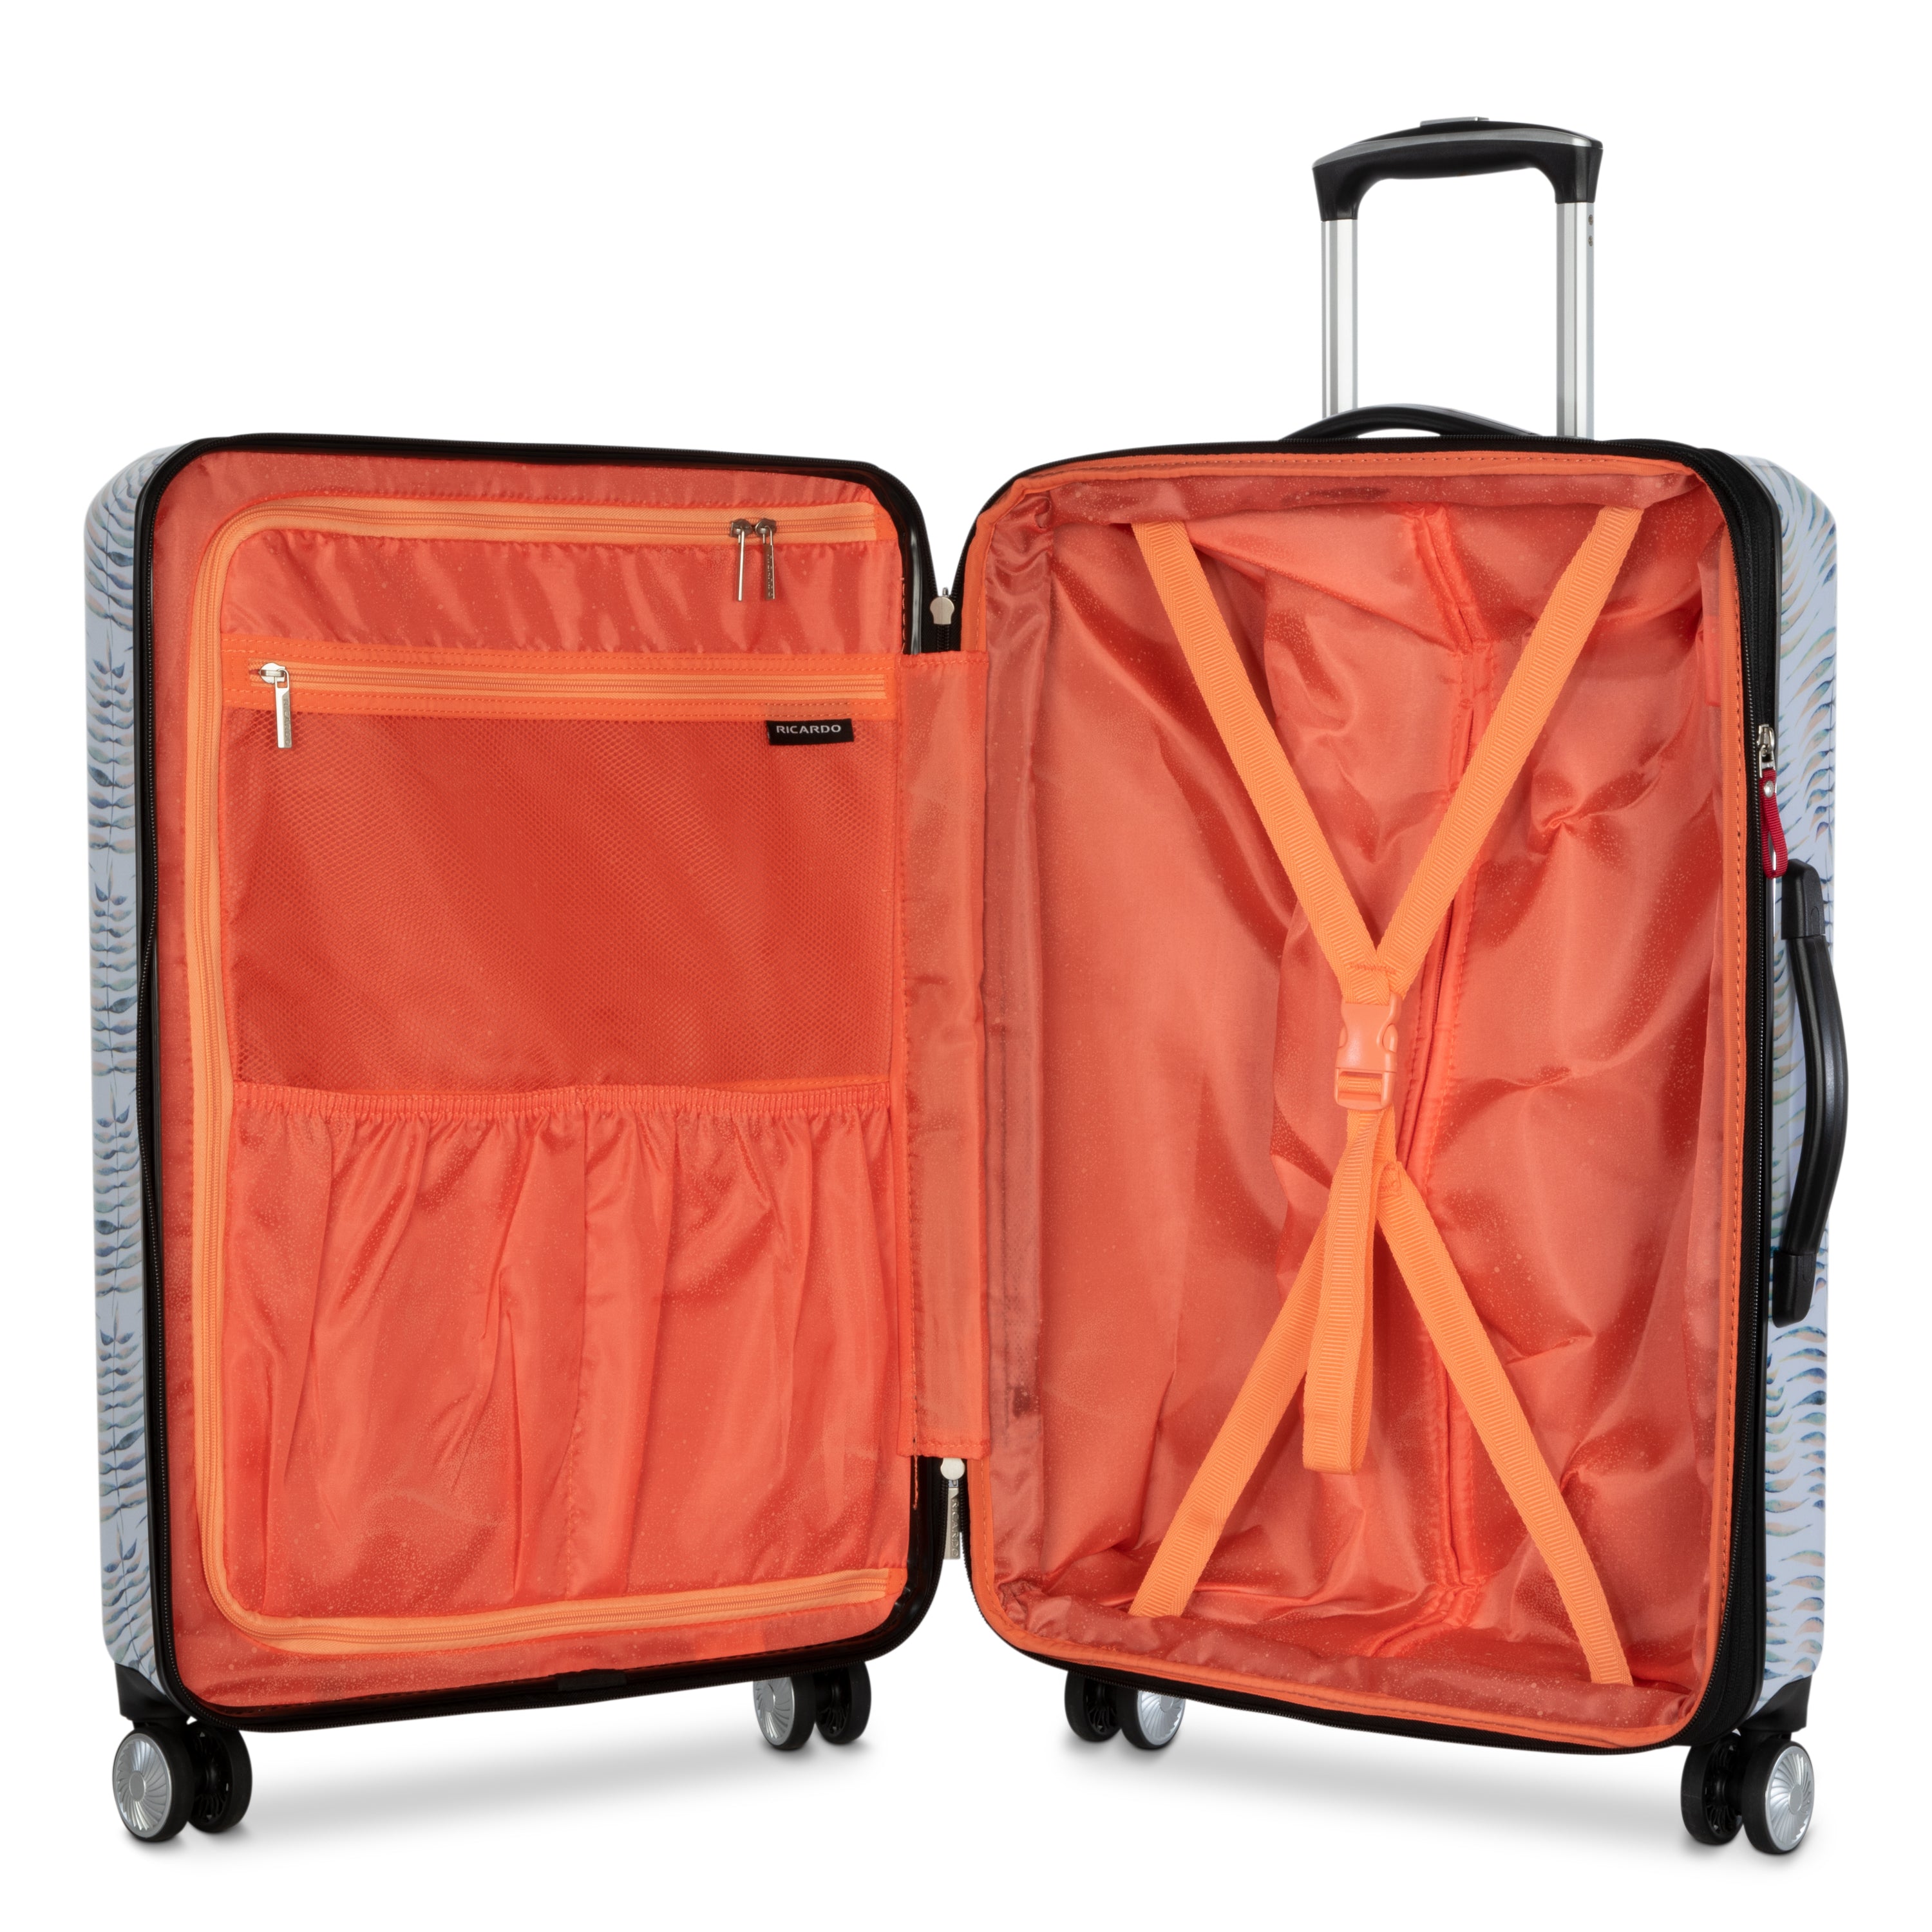 TACH Lite Carry On | TACH Luggage